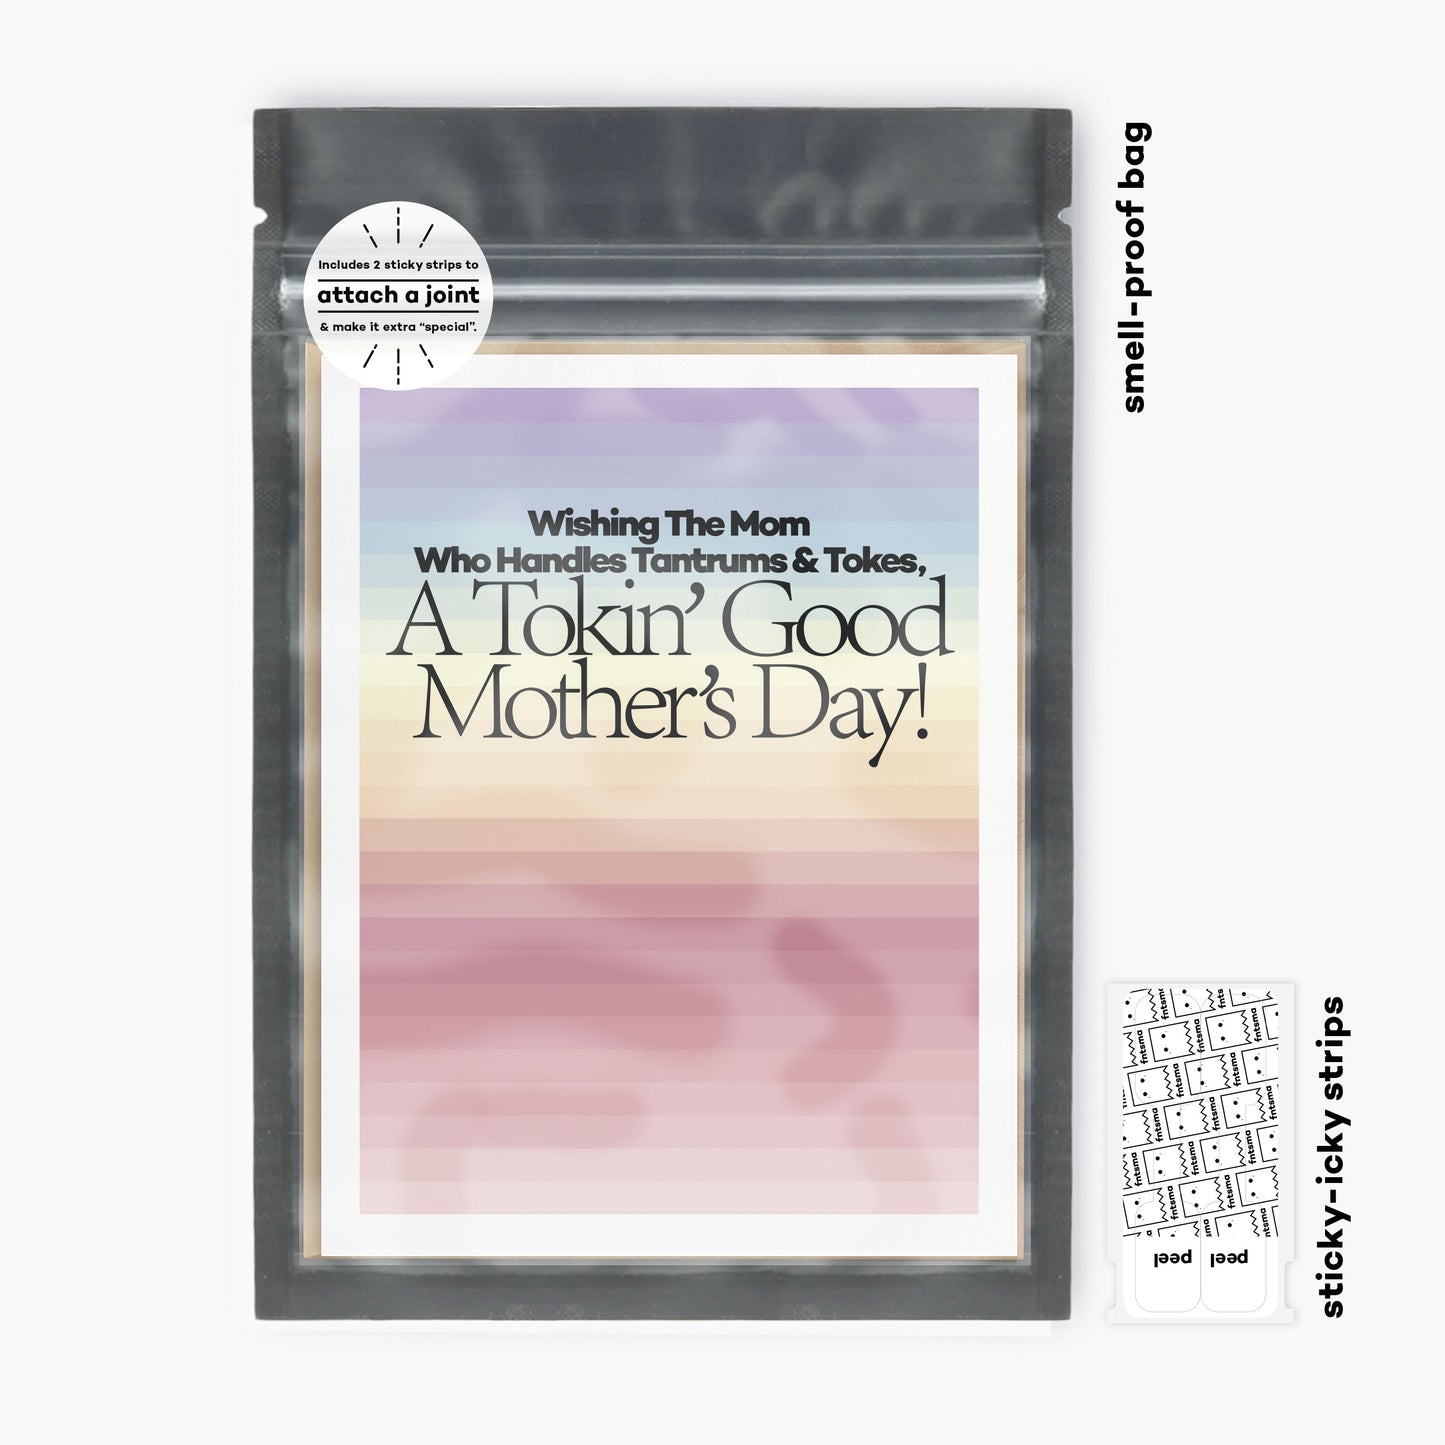 Wishing The Mom Who Handles Tantrums & Tokes, A Tokin' Good Mother's Day!